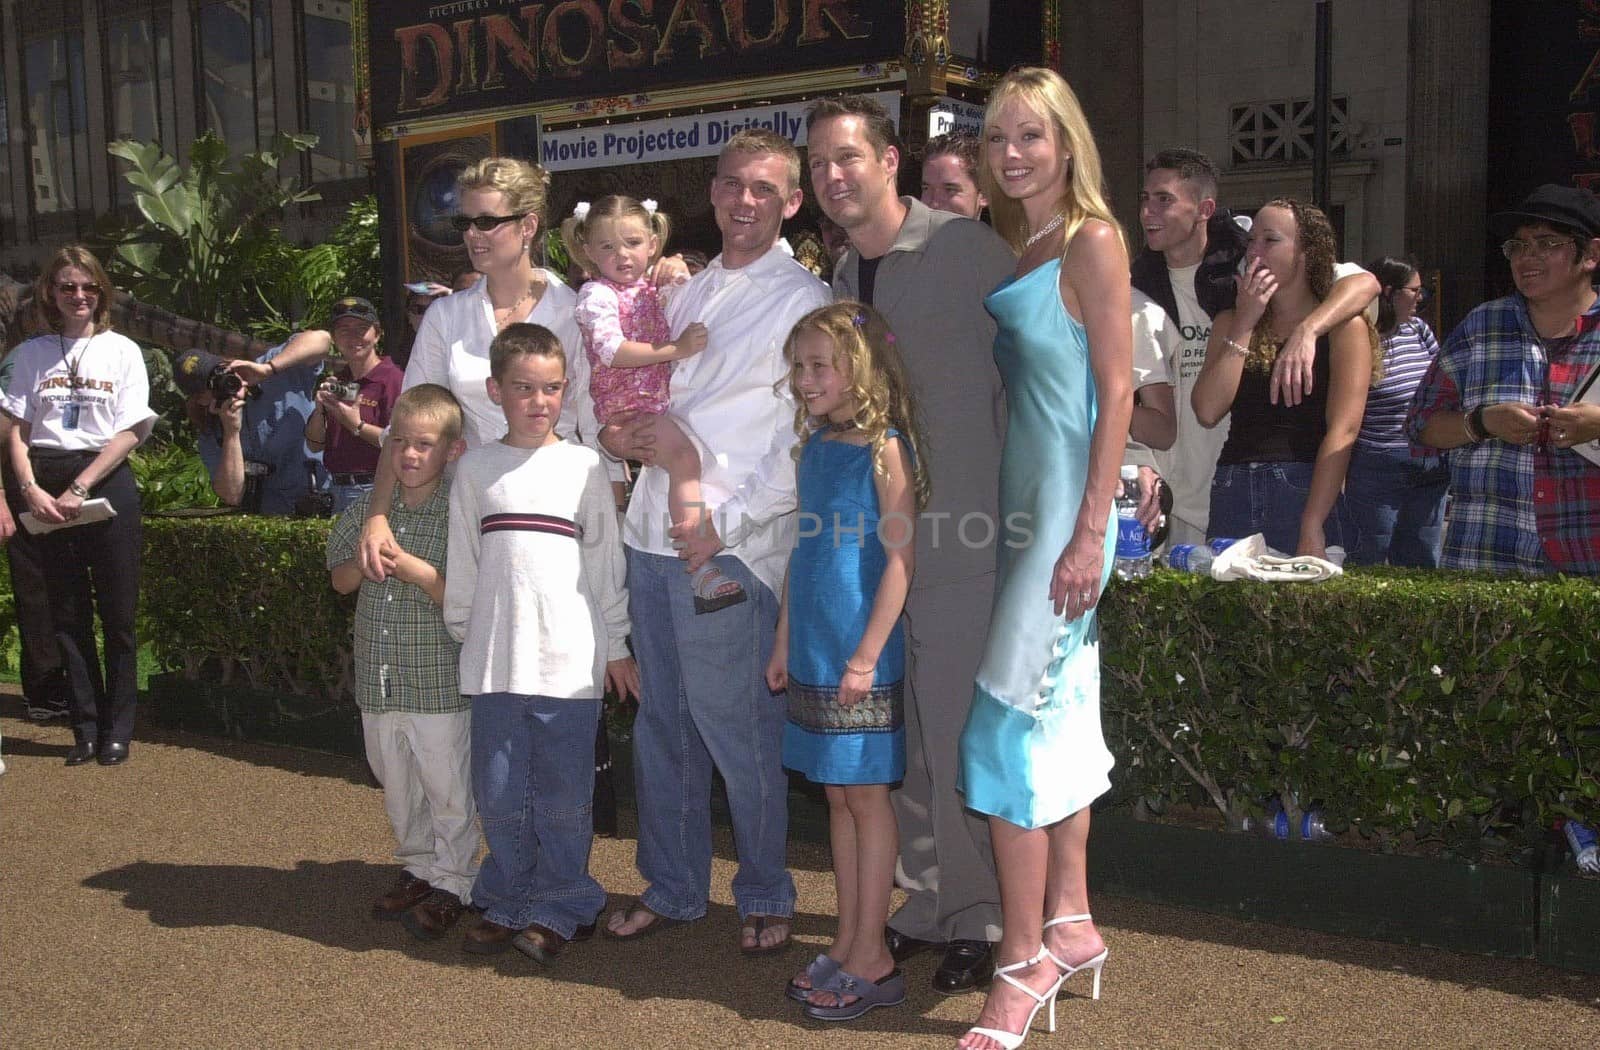 Rick Schroder and family with D.B. Sweeney, Ashley Vashon and Hayden Panettiere at the premiere of Disney's "DINOSAUR" in Hollywood, 05-13-00